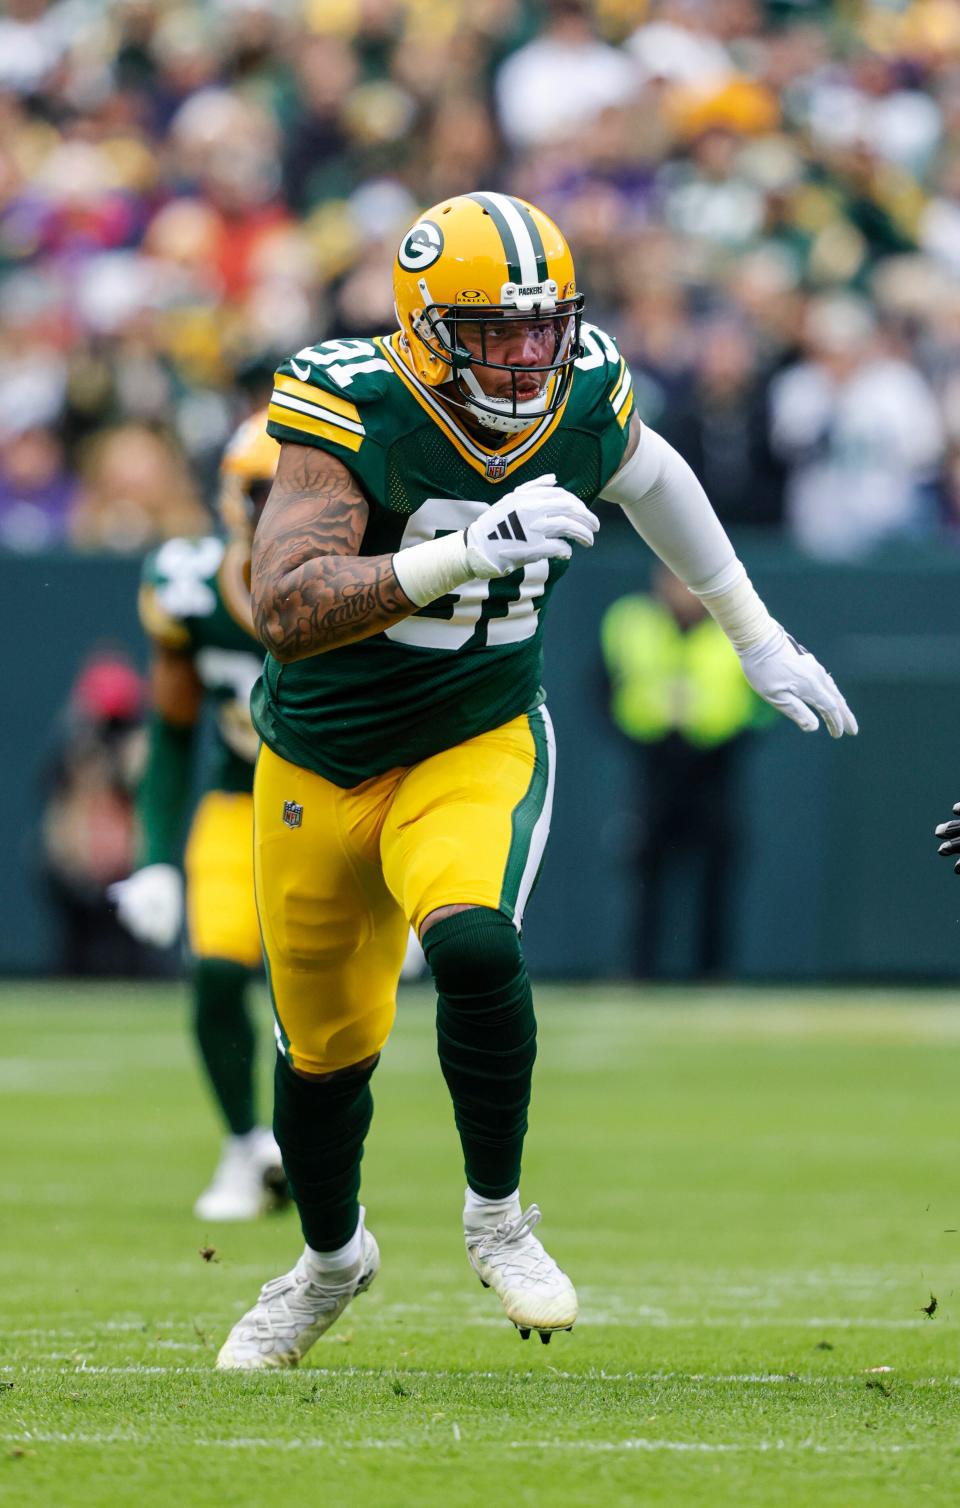 Preston Smith had two sacks and a forced fumble on Sunday against the Minnesota Vikings.